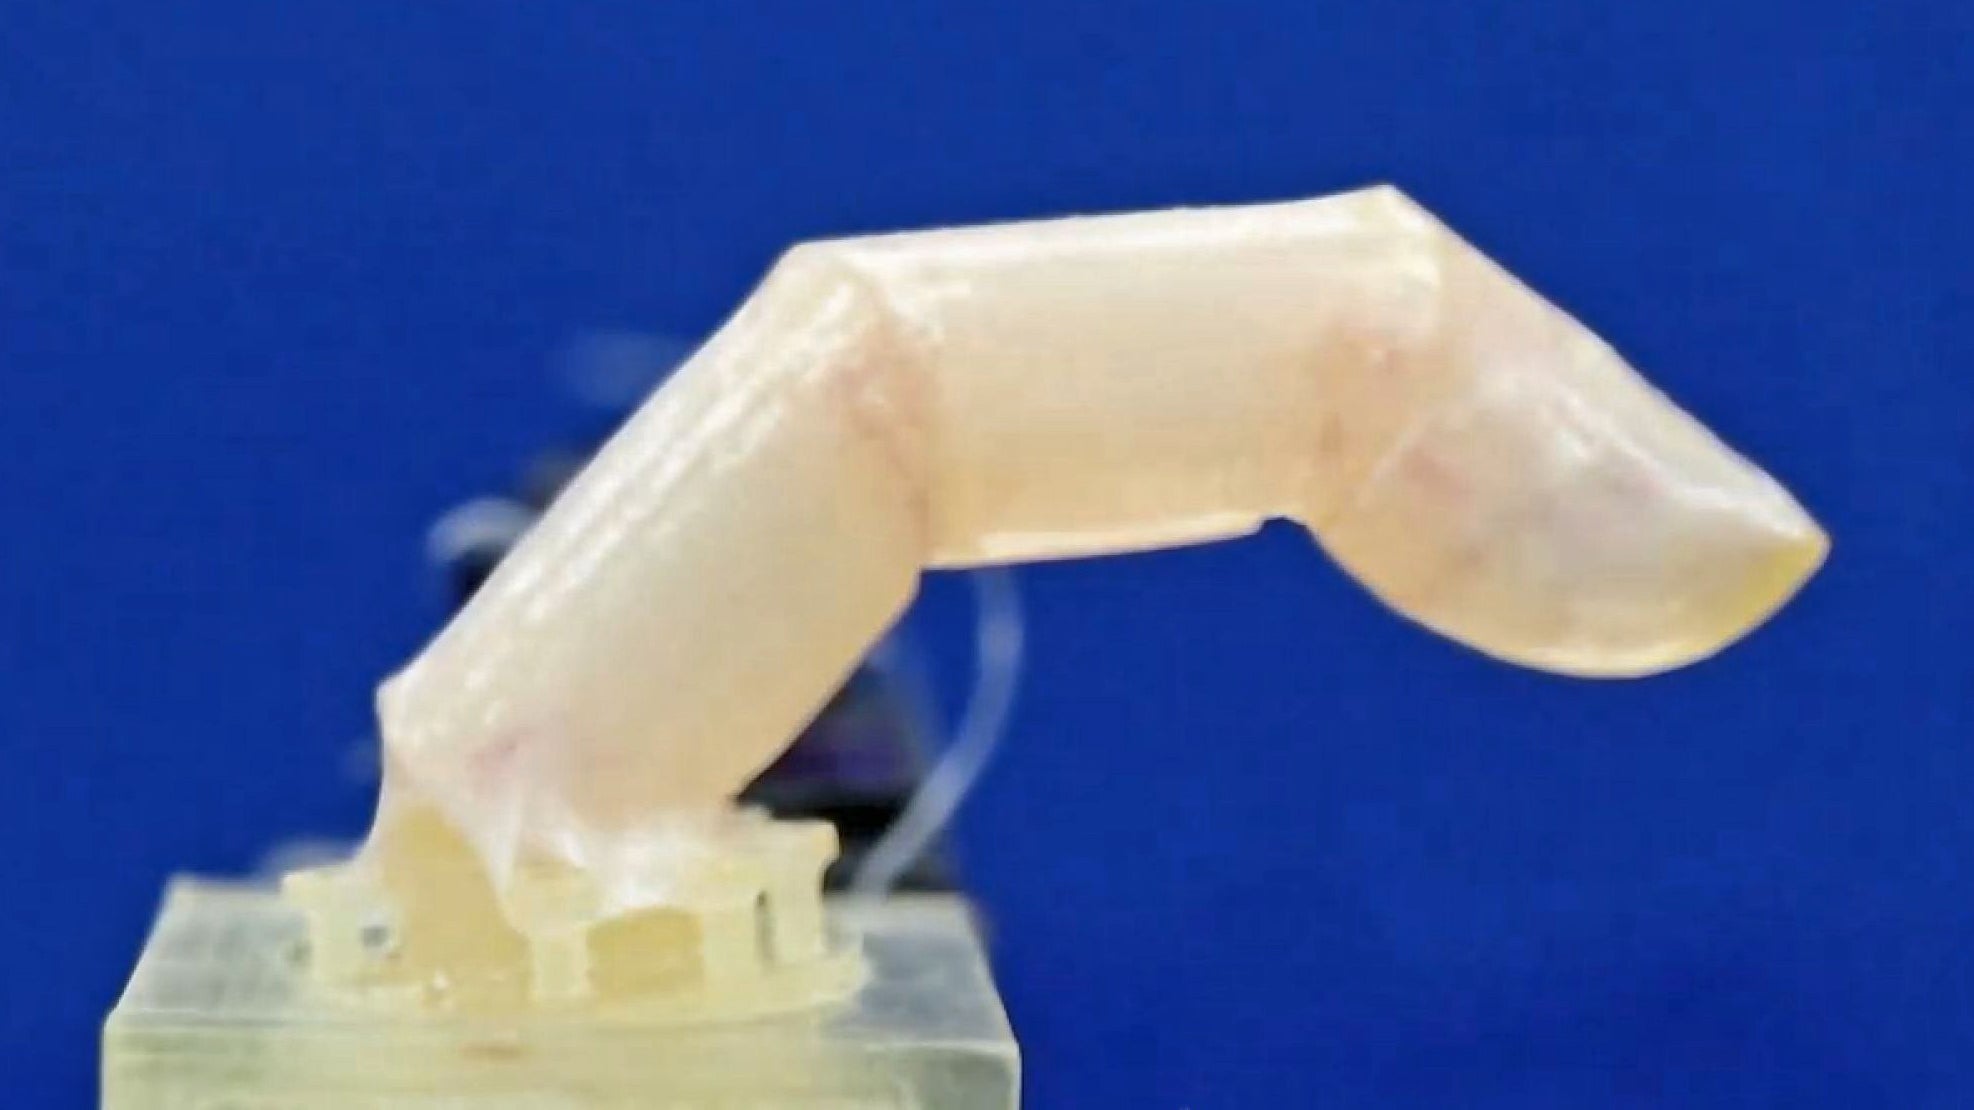 A bending robotic finger covered with human skin developed by researchers at the University of Tokyo. (Image: Shoji Takeuchi)